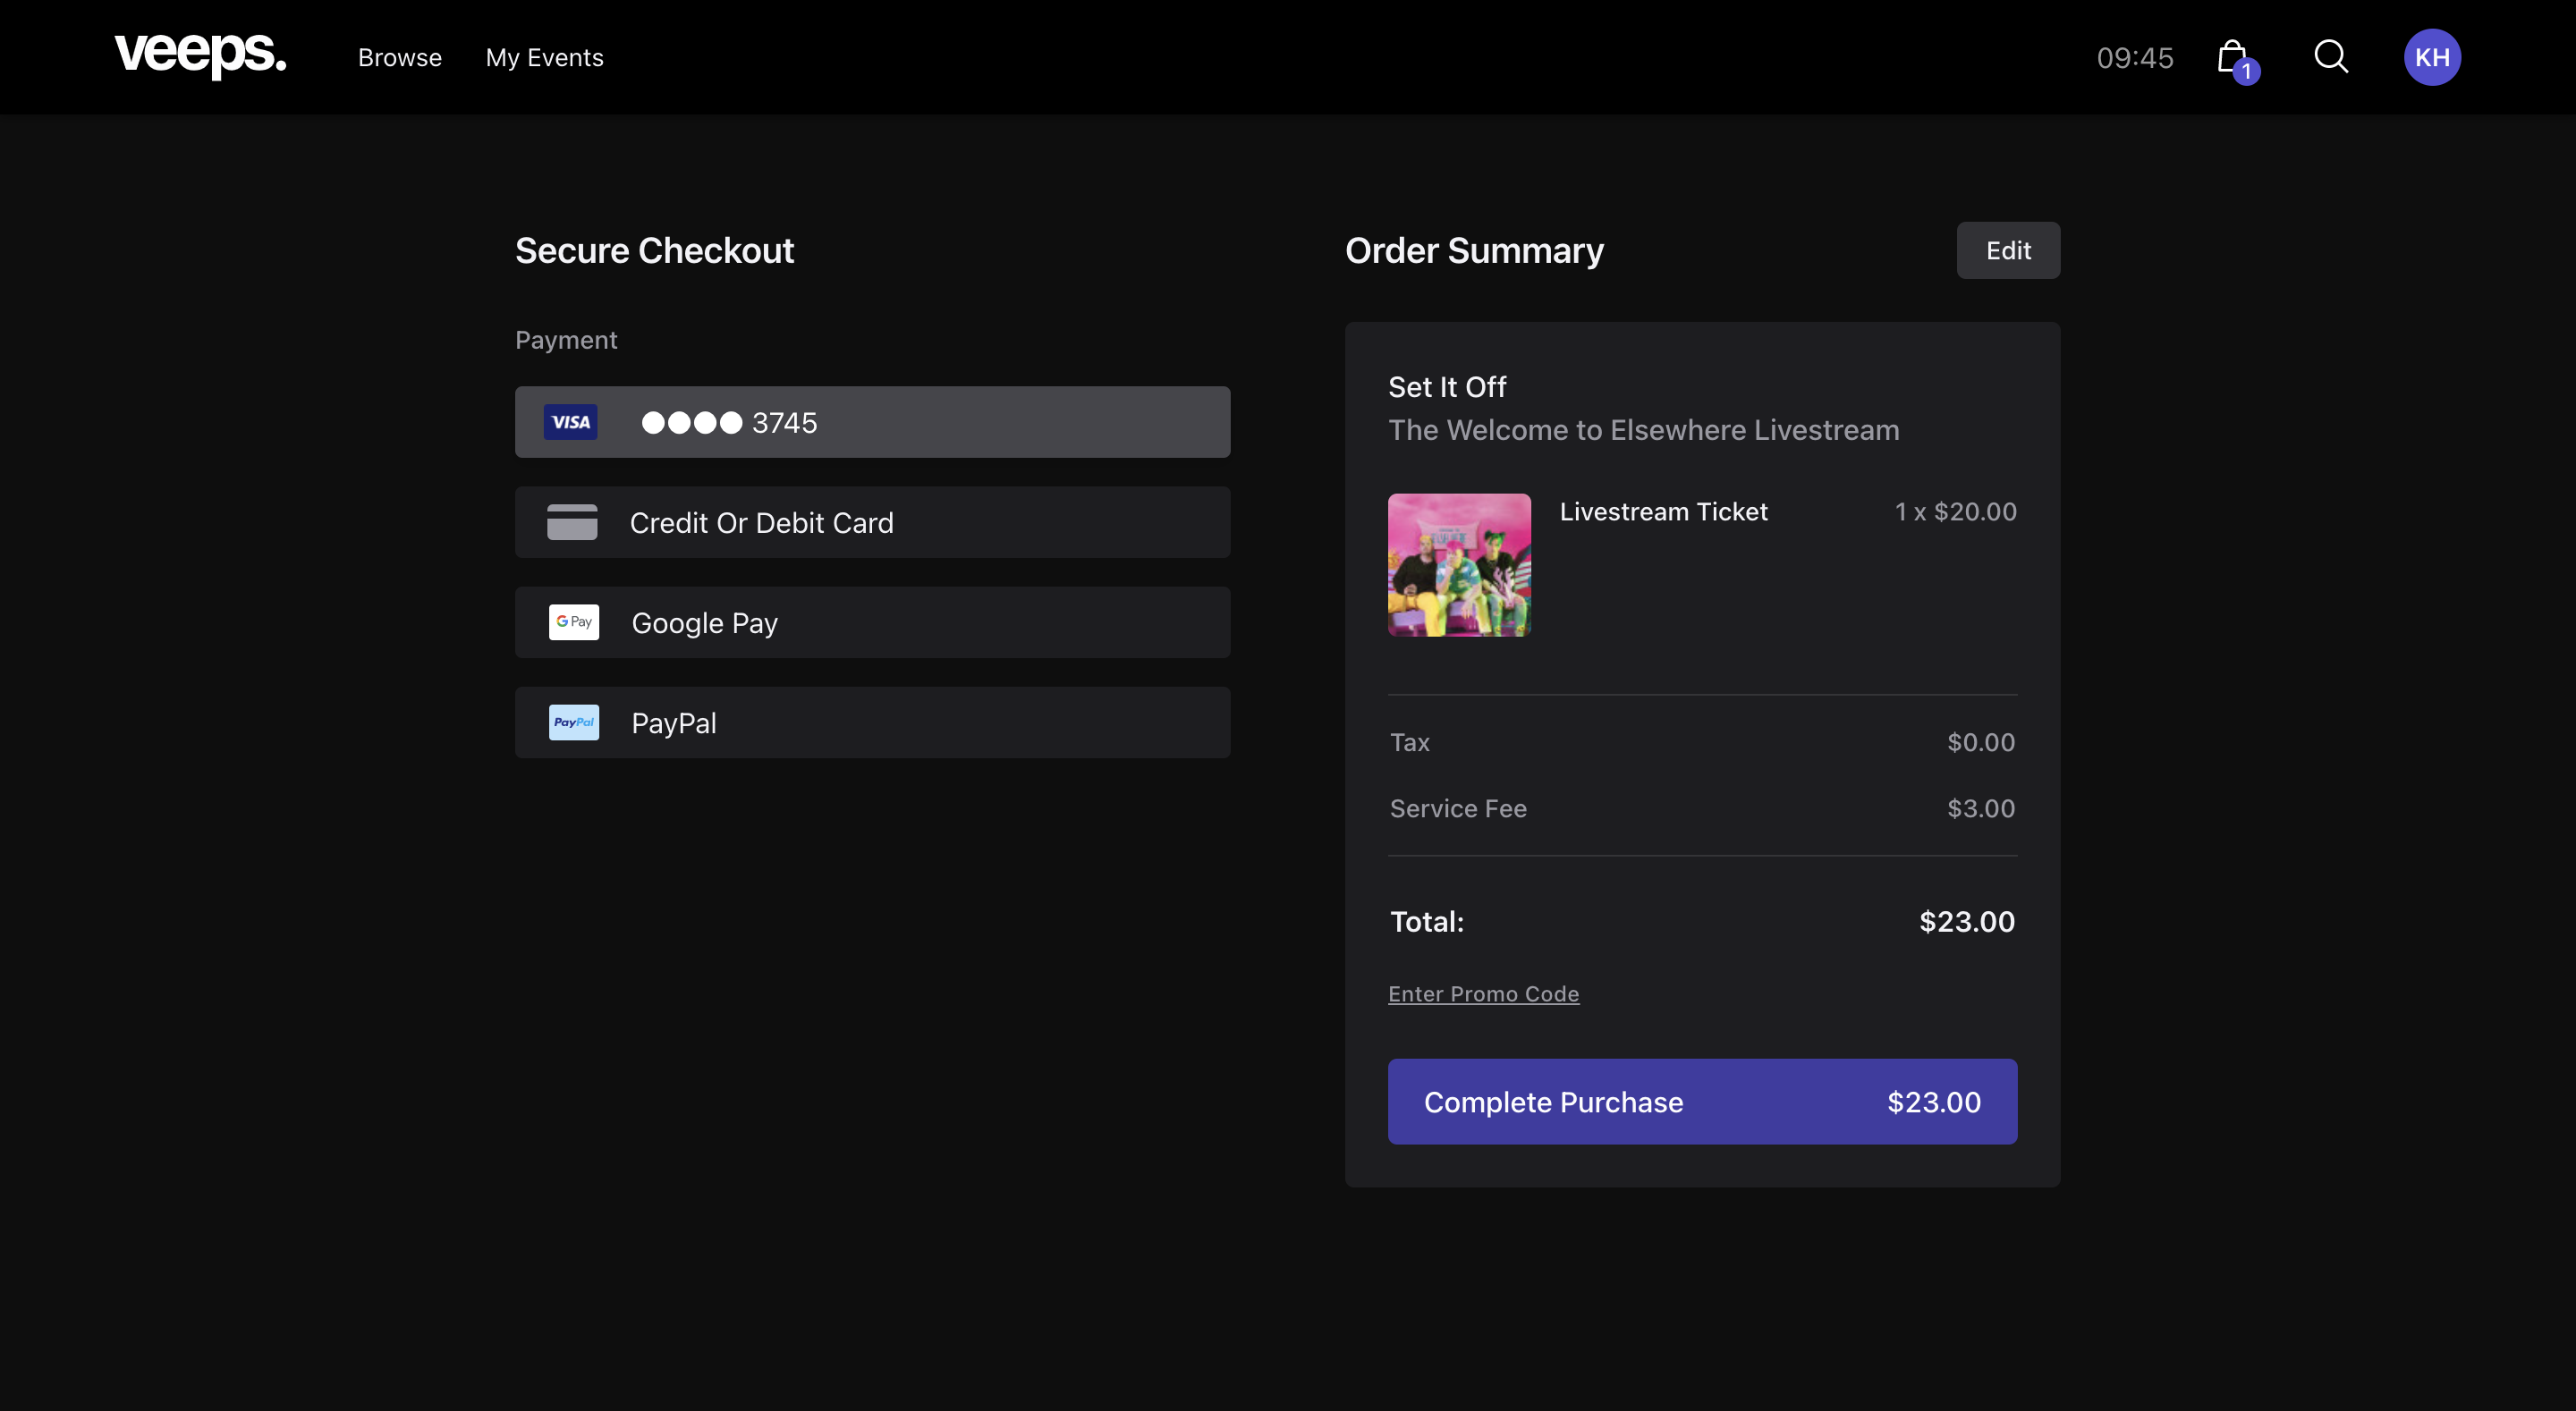 Veeps UI showing secure checkout, including payment information and order summary.